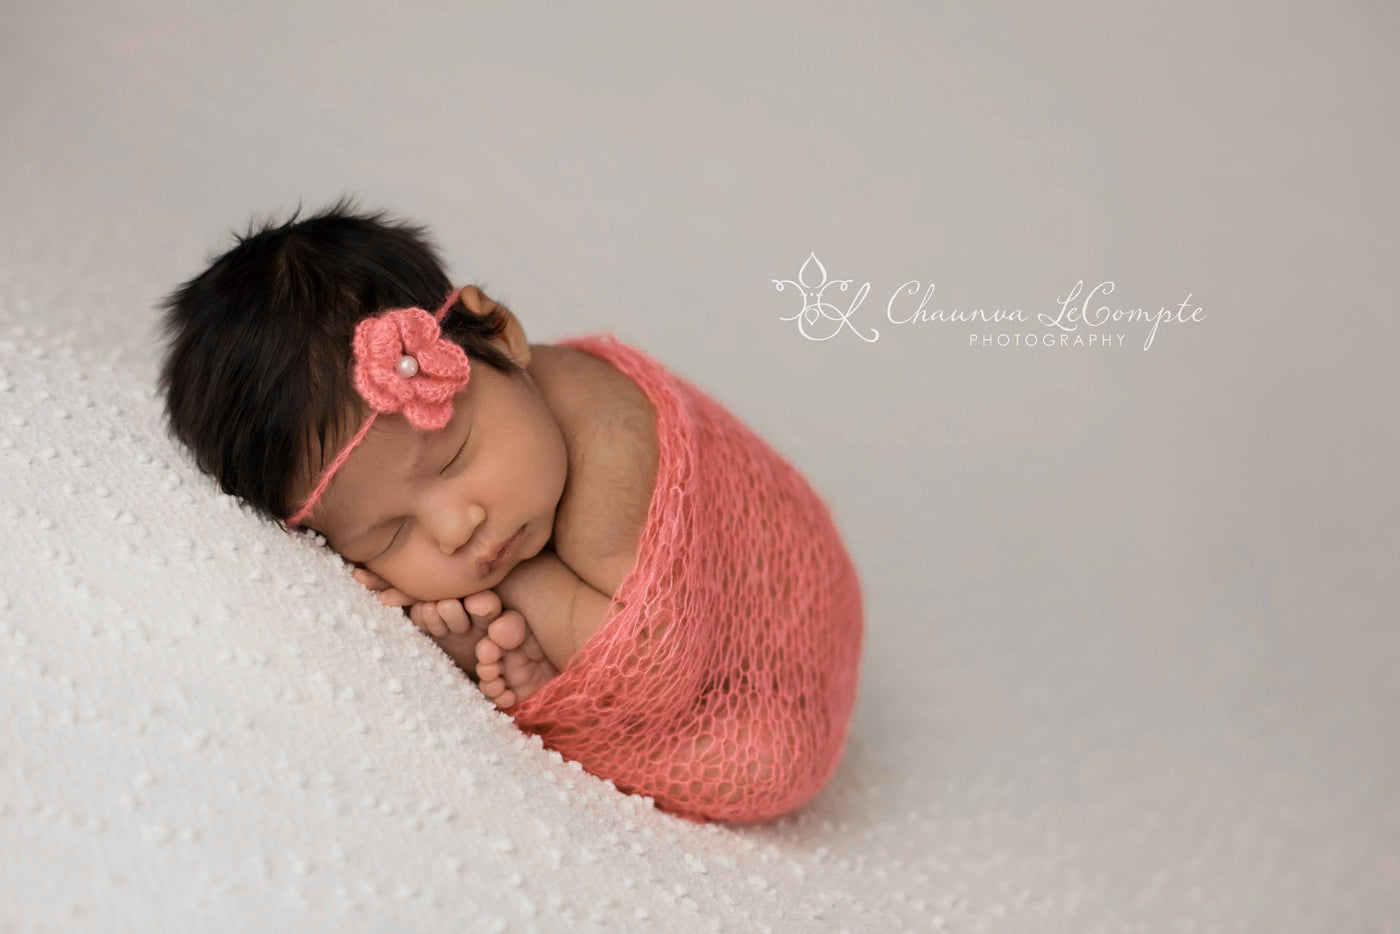 SET Coral Peach Mohair Knit Baby Wrap and Headband - Beautiful Photo Props